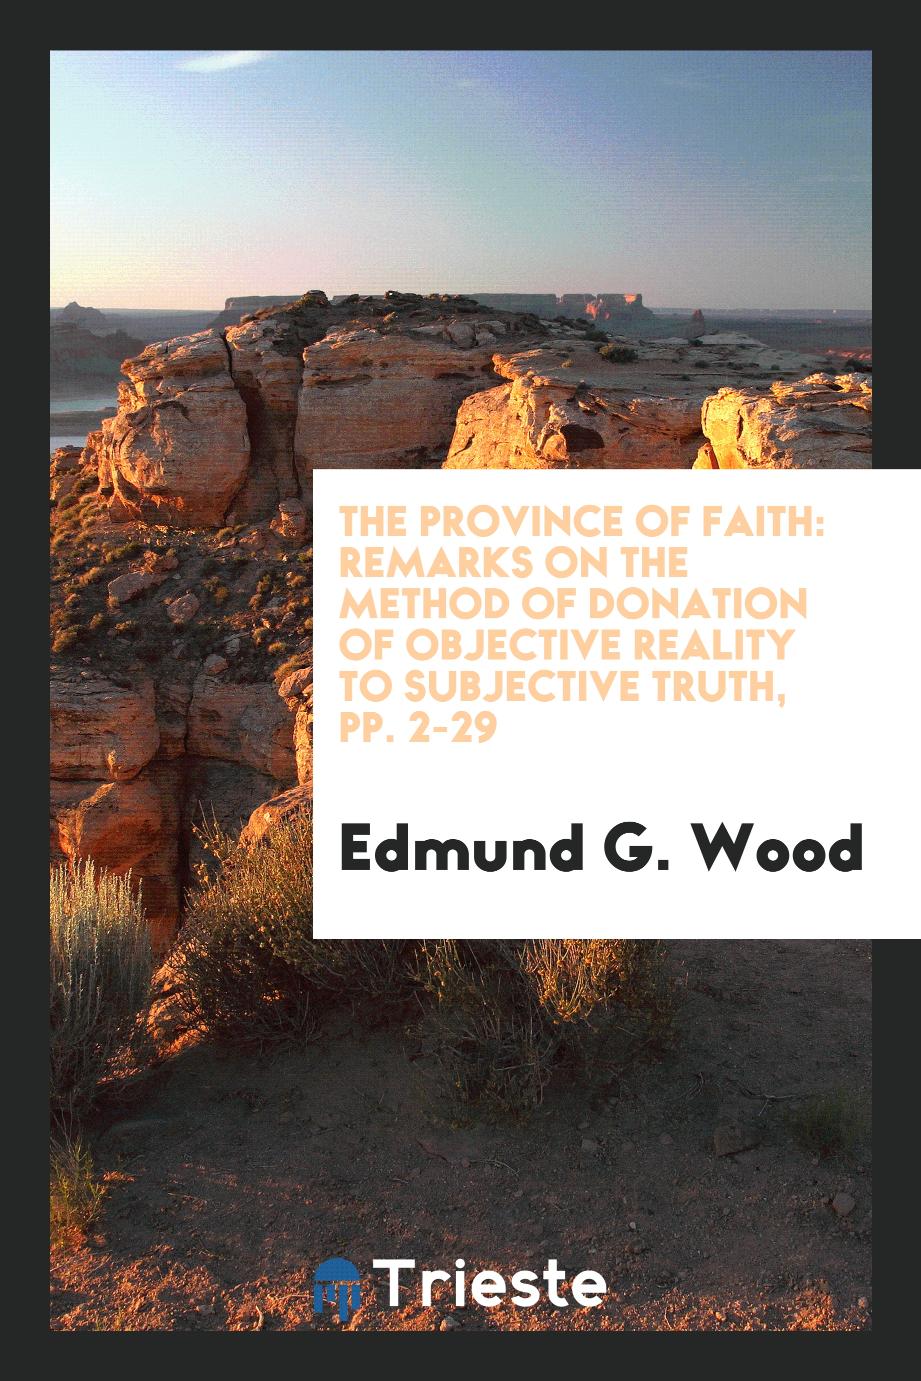 The Province of Faith: Remarks on the Method of Donation of Objective reality to subjective truth, pp. 2-29